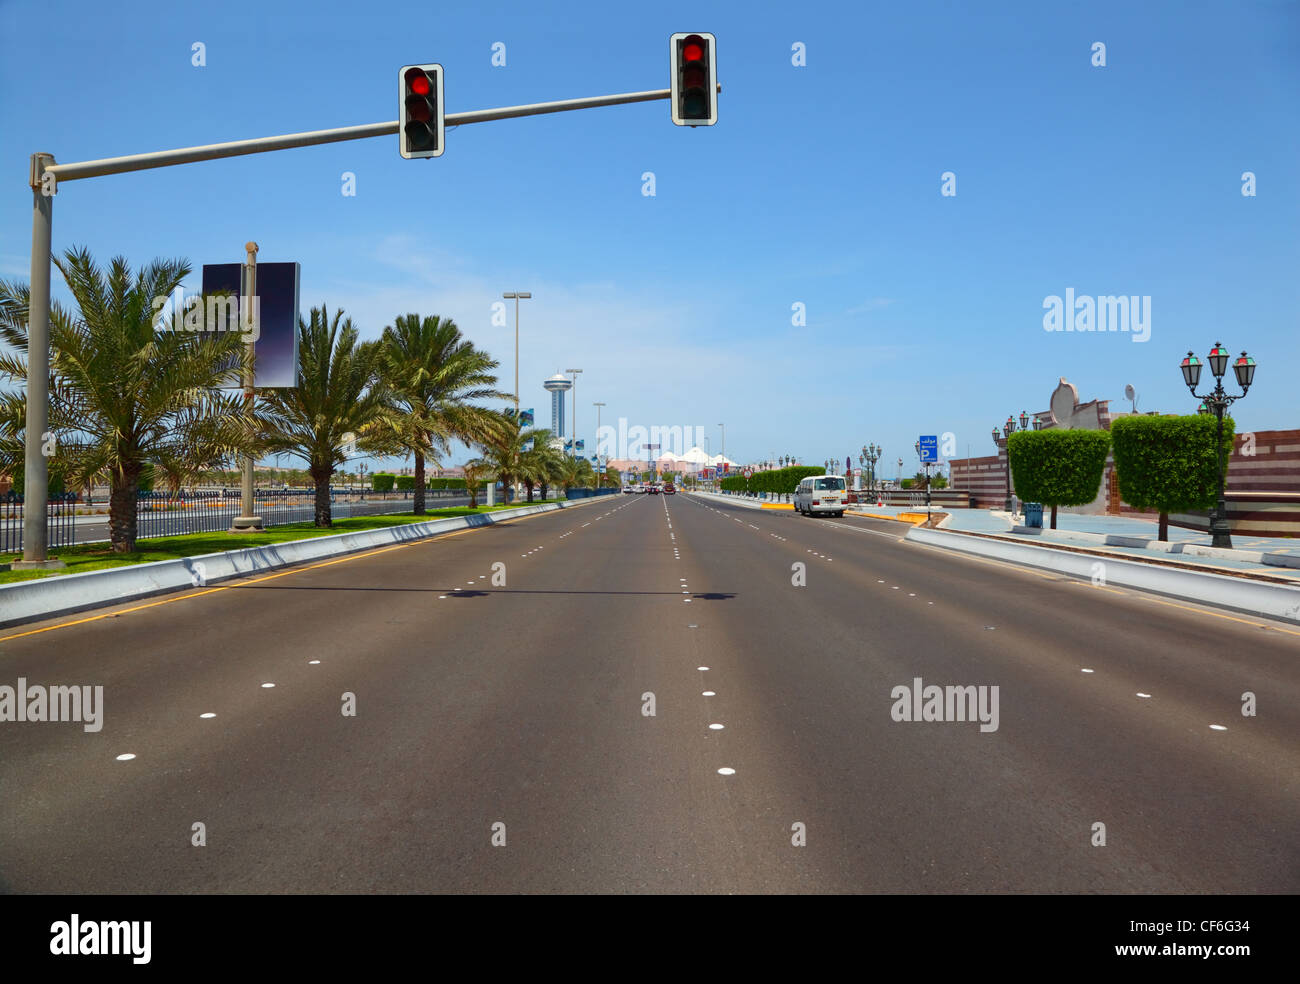 The road with hanging traffic lights to the Marina mall in Abu Dhabi, UAE. Stock Photo